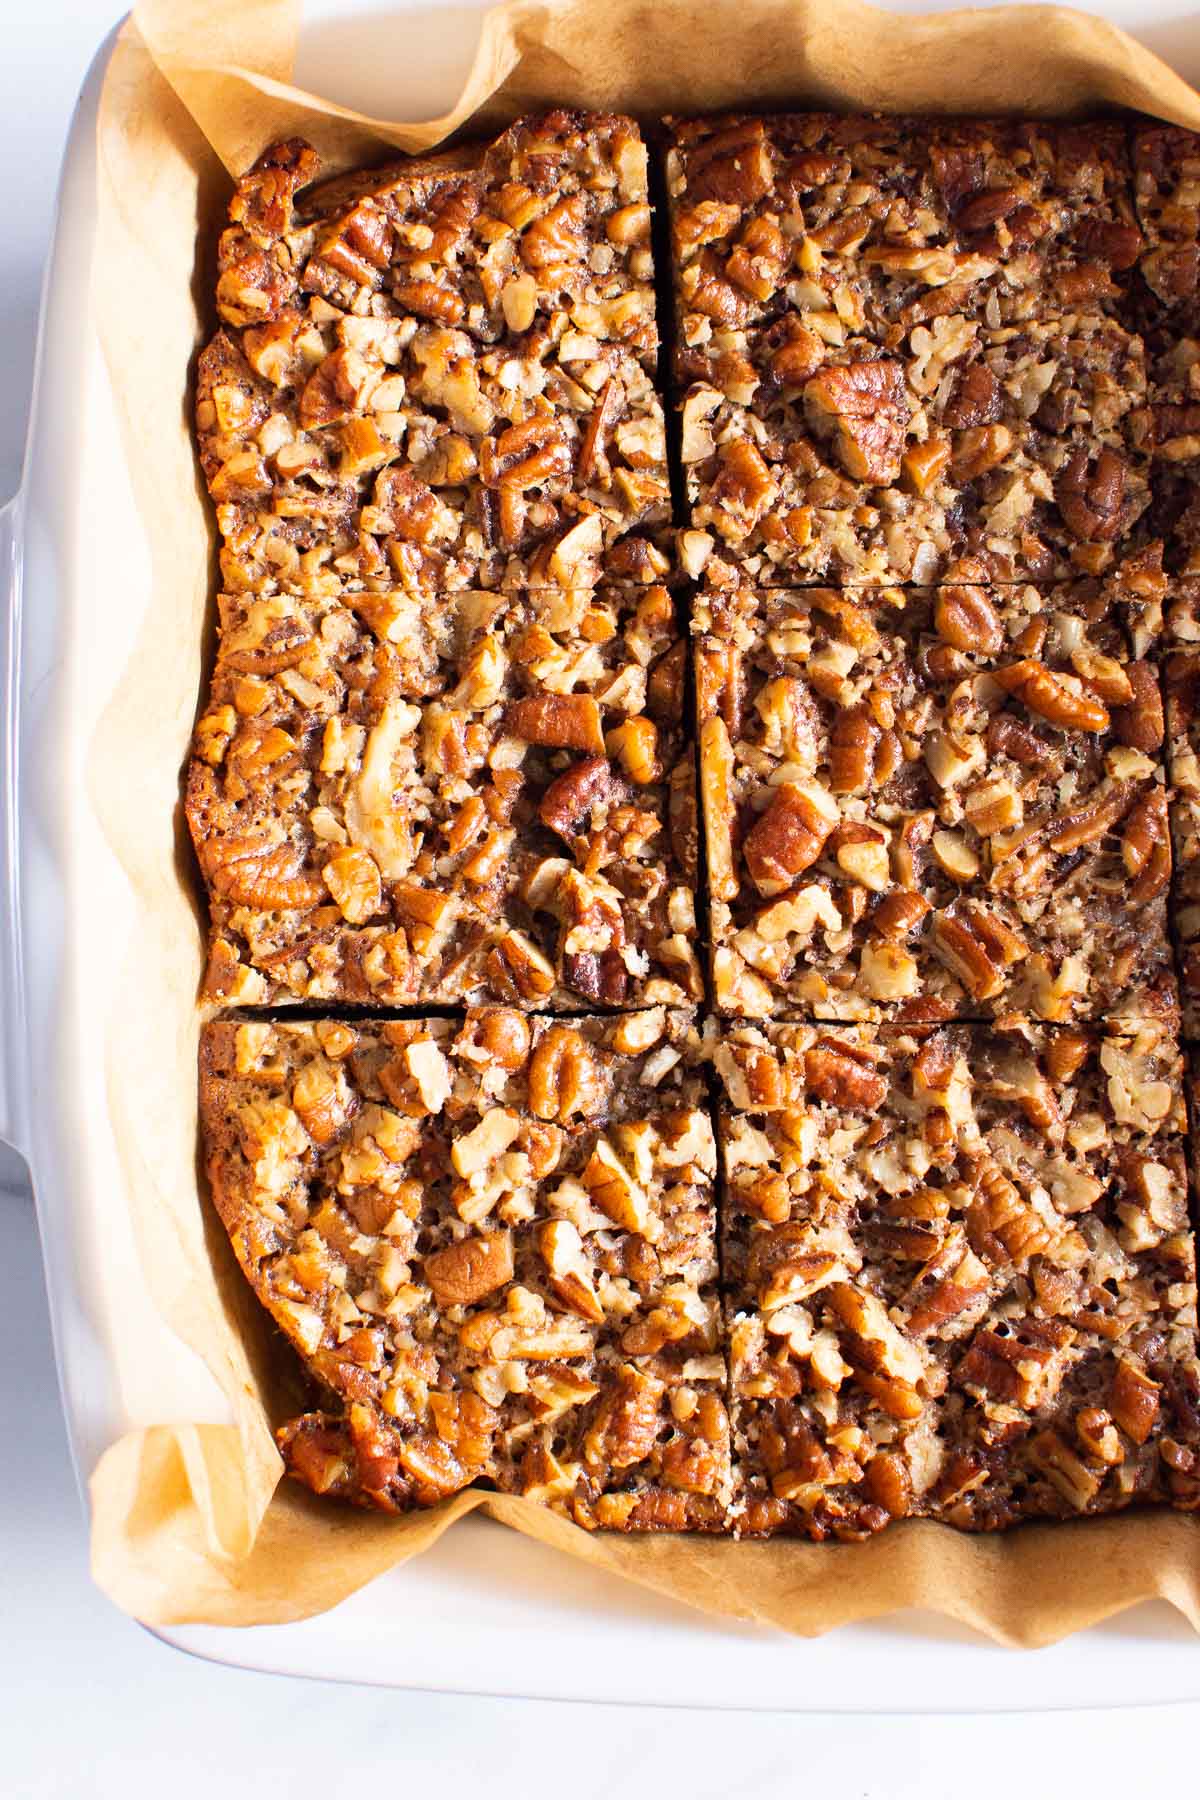 Pecan squares sliced in baking dish with parchment paper.